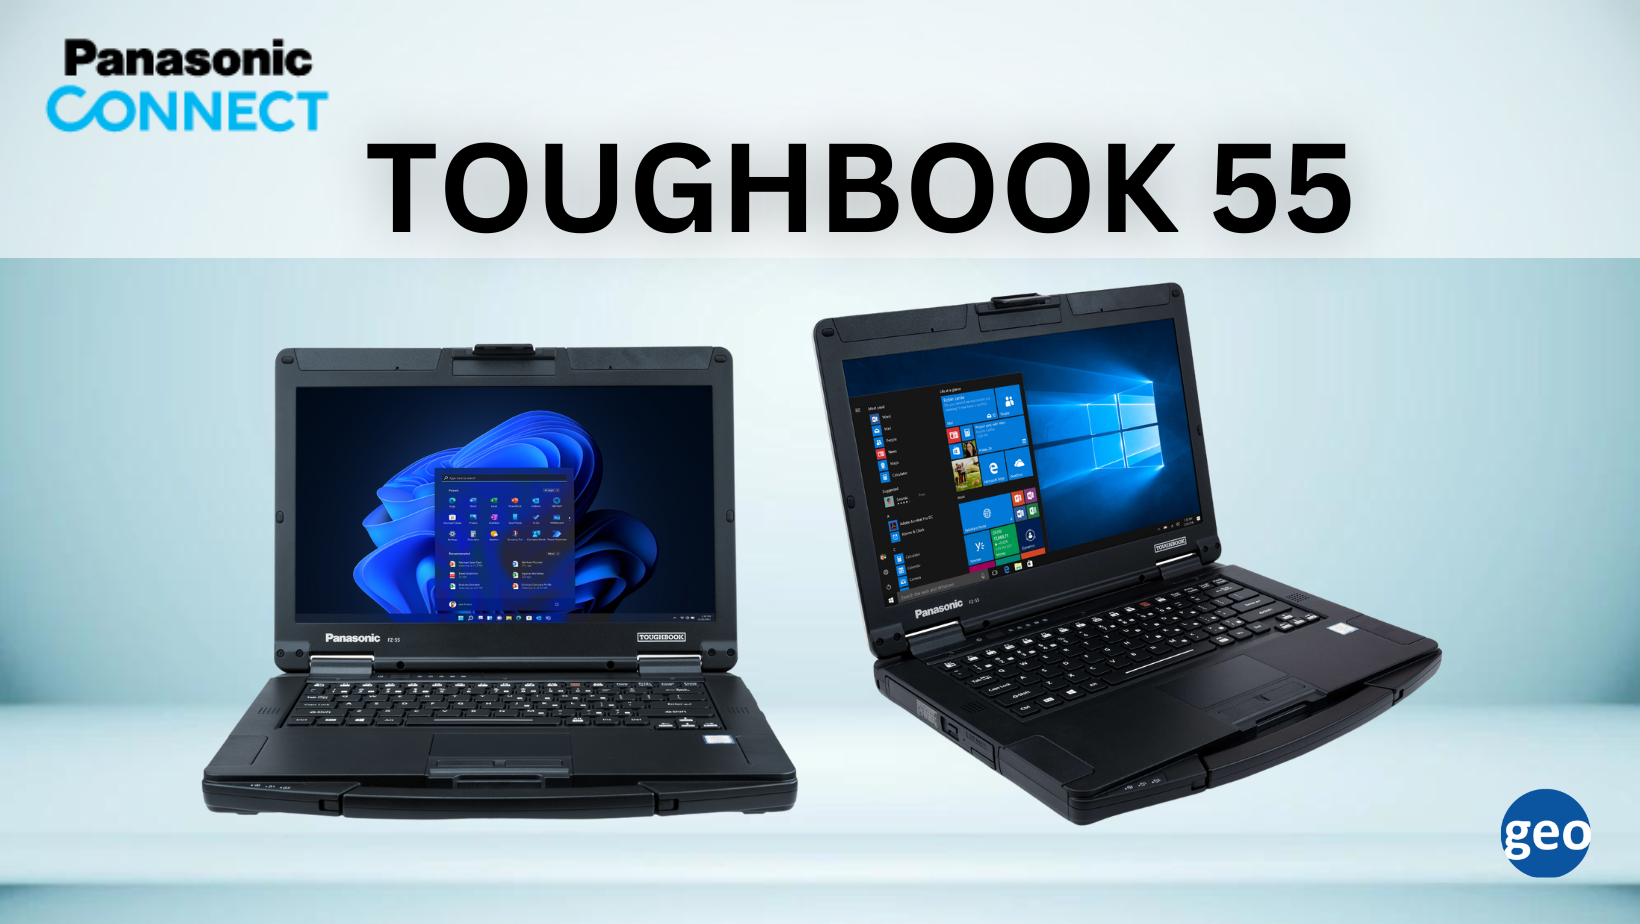 Panasonic: TOUGHBOOK 55 Offers High Durability Performance and Value for the Most Challenging Environments